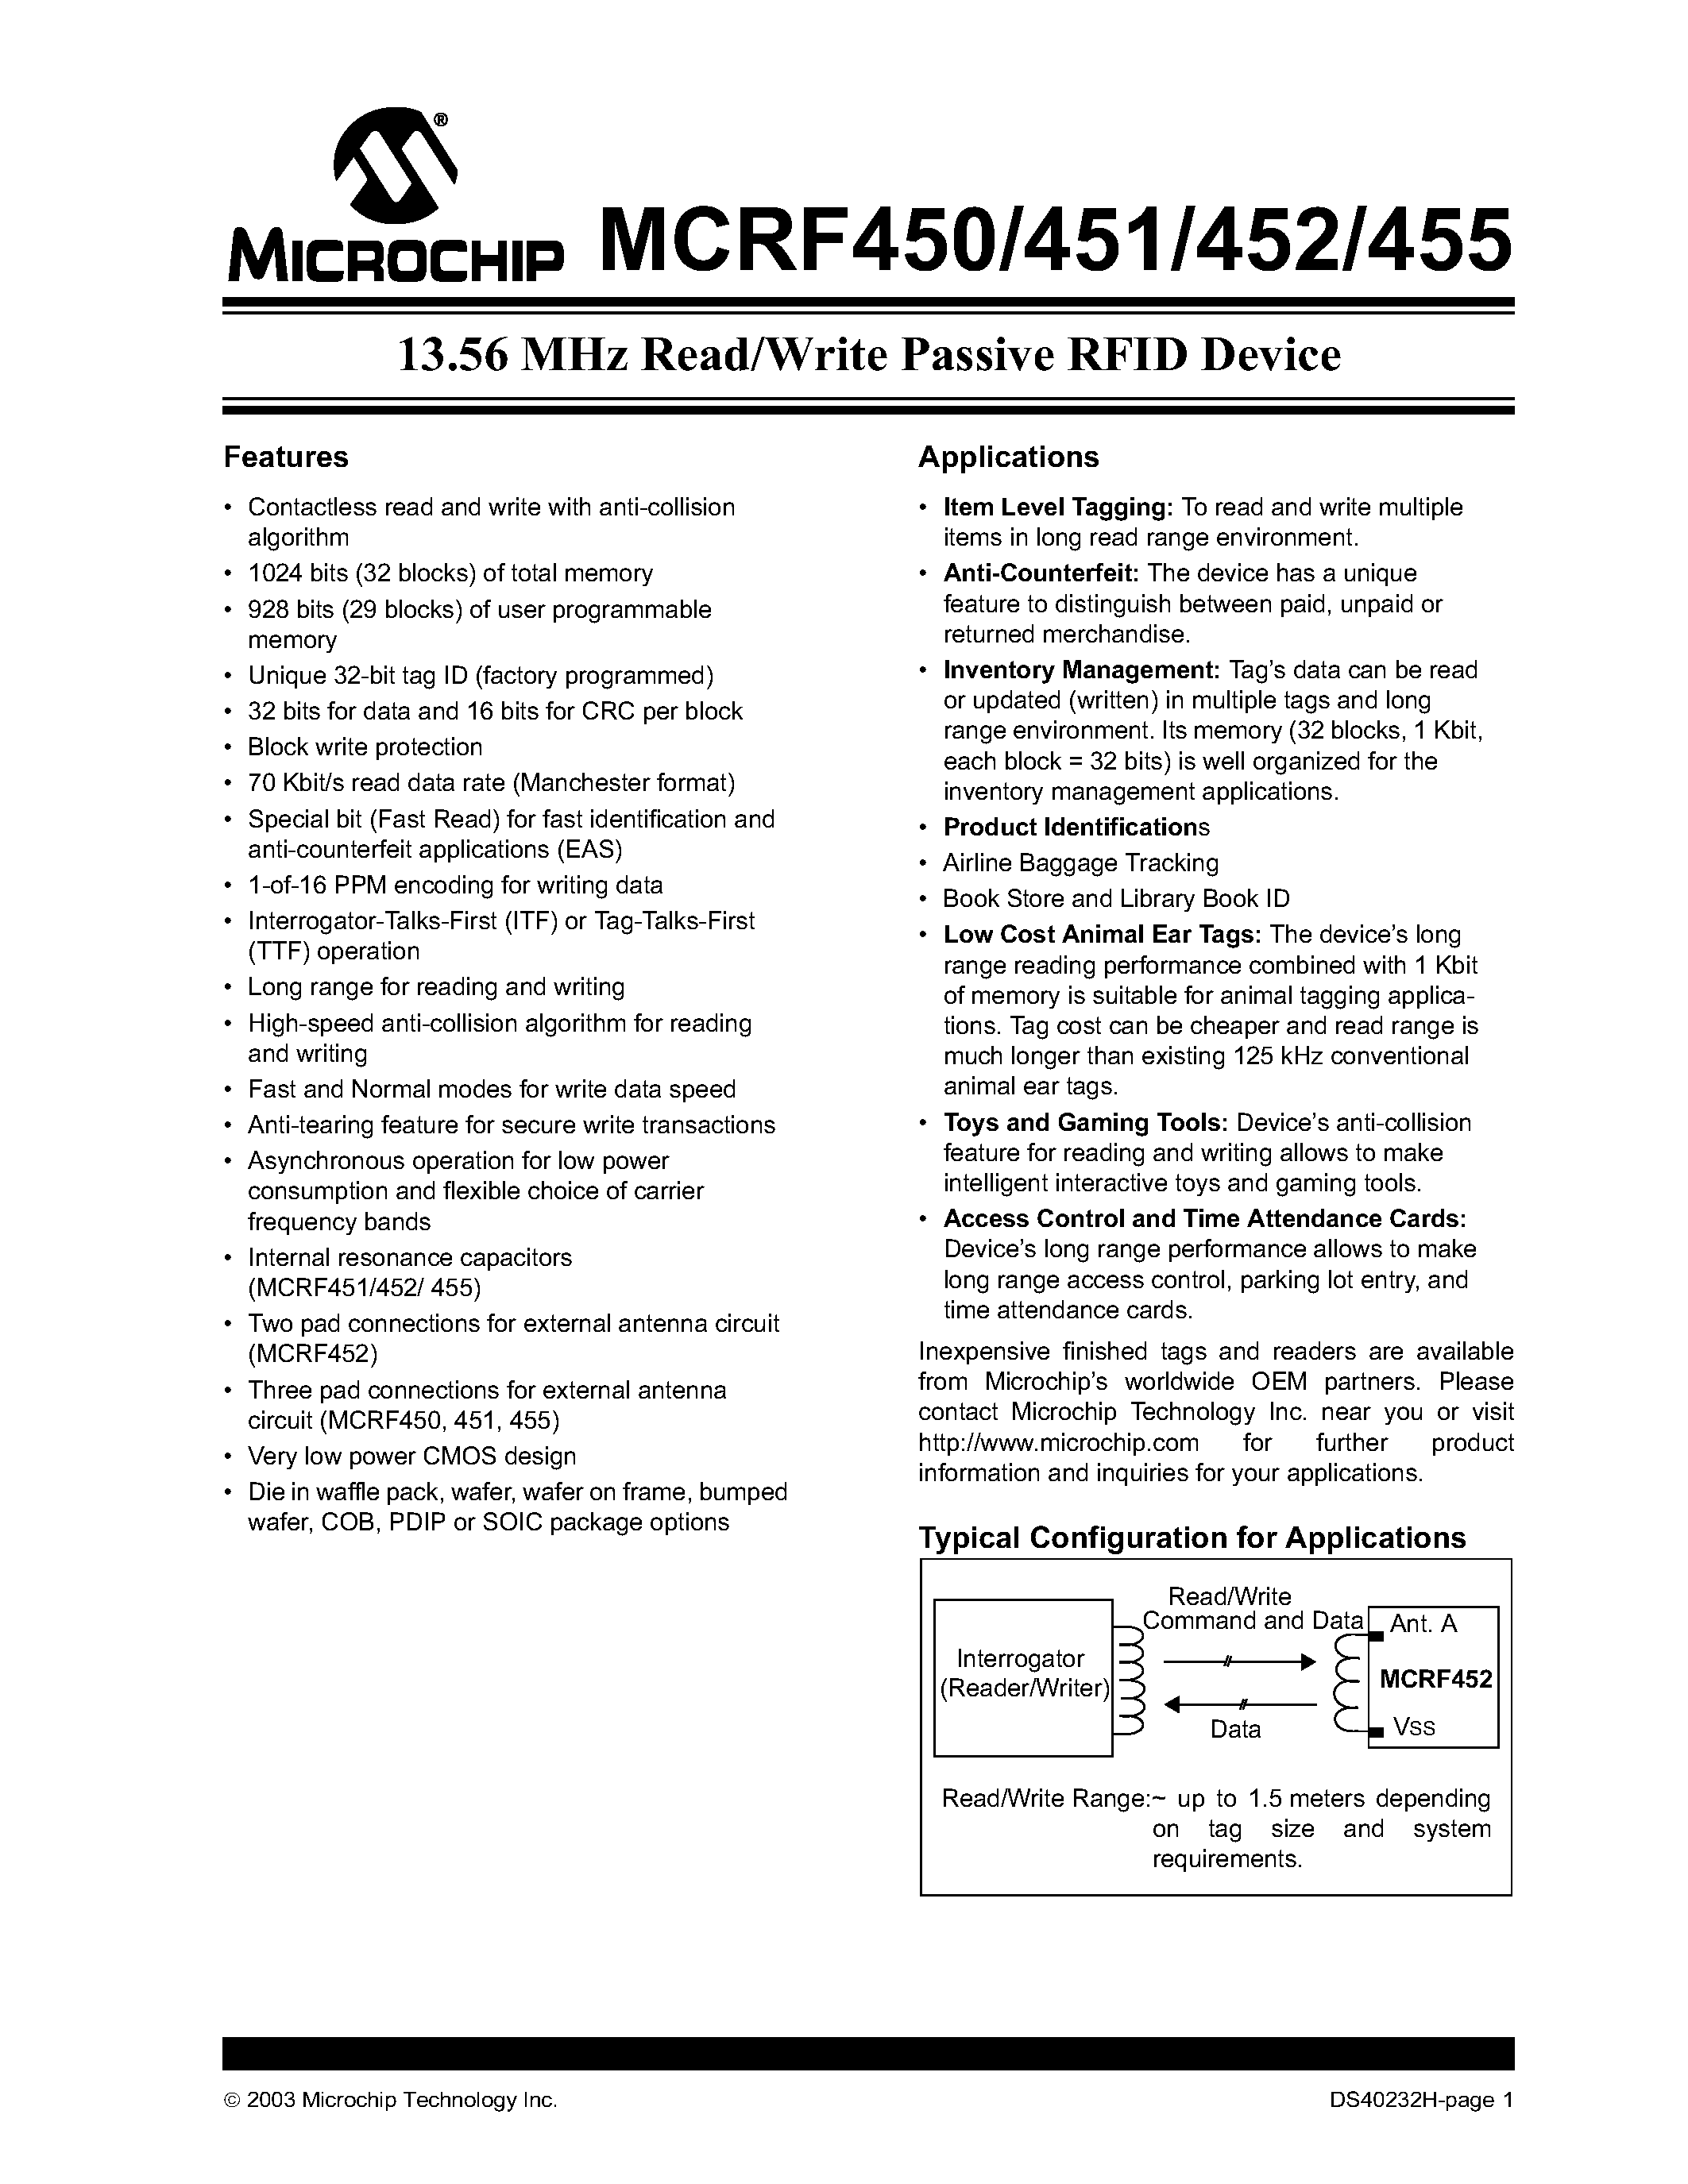 Datasheet MCRF452 - 13.56 MHz Read/Write Passive RFID Device page 1